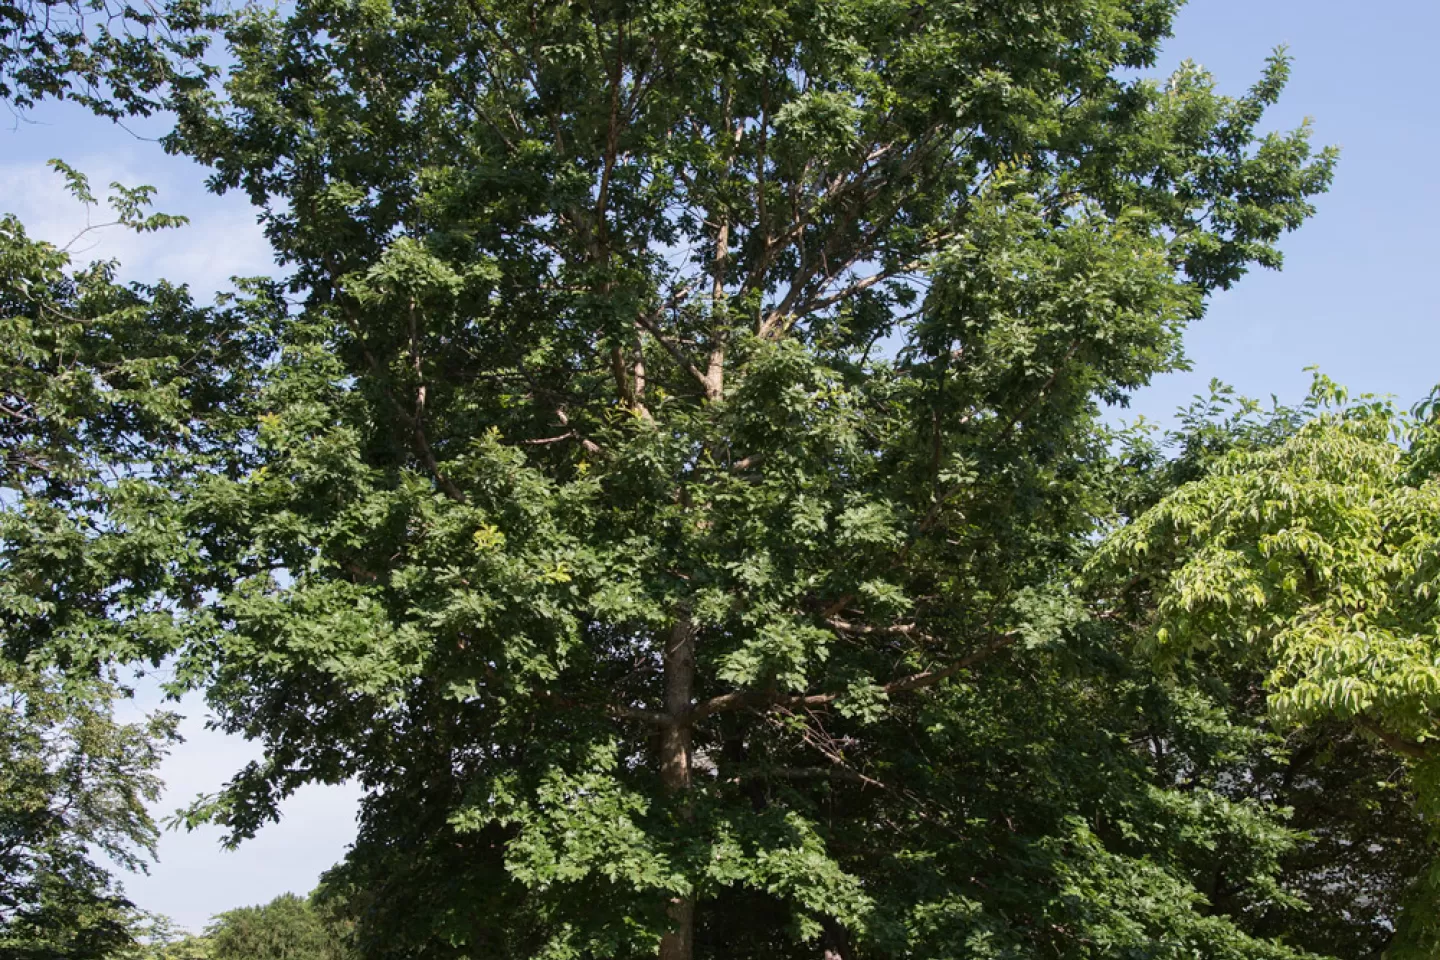 The Senator Byrd tree on the U.S. Capitol Grounds during summer.